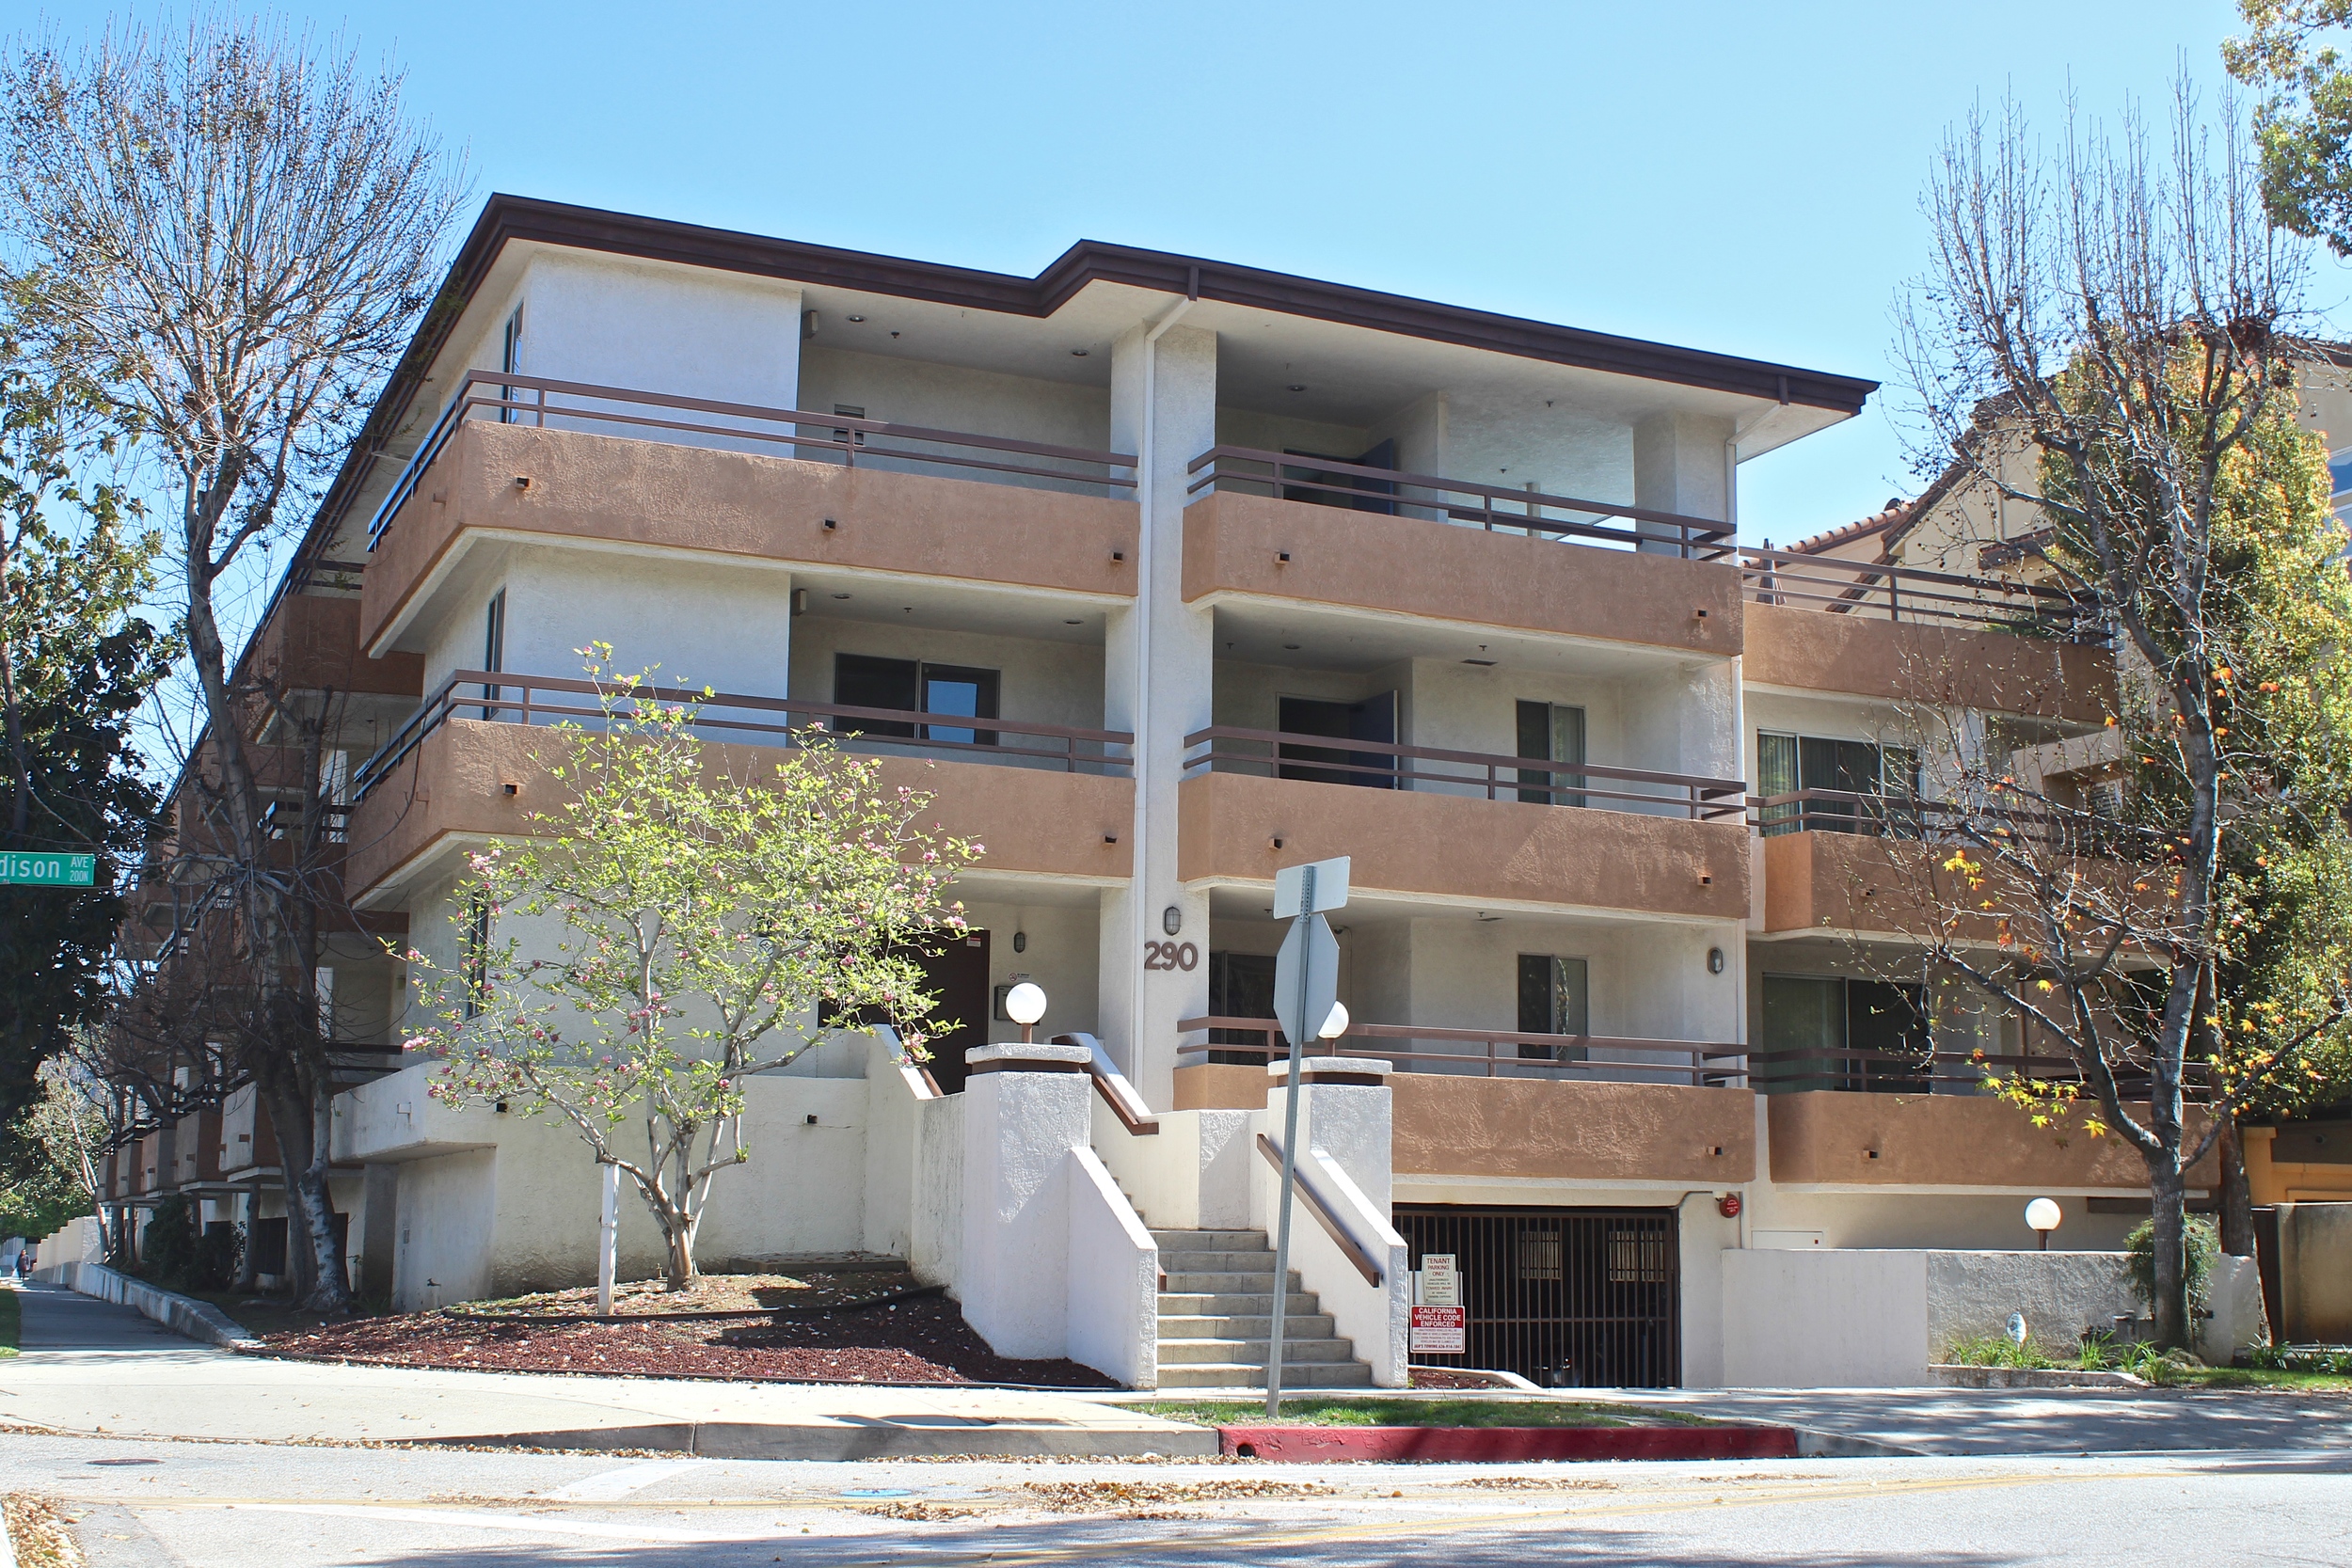 Three story white apartment building with balconies facing the street and gated subterranean garage.